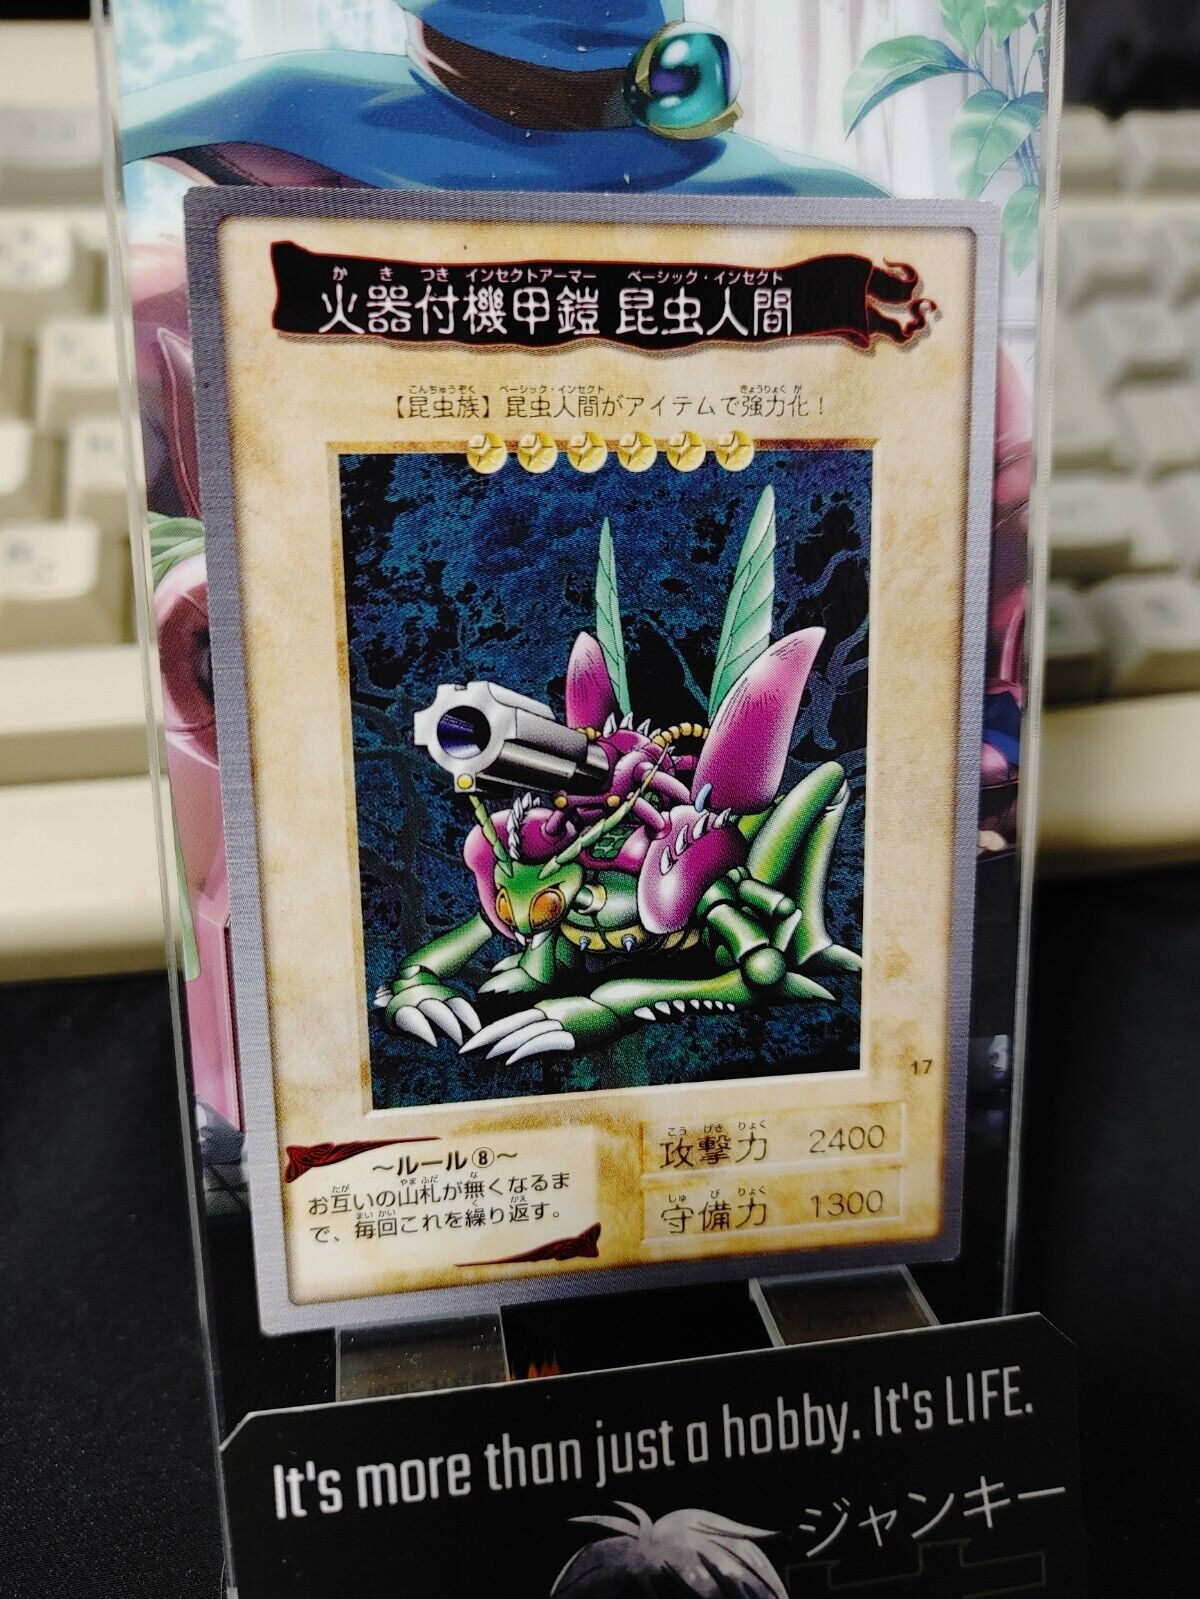 Yu-Gi-Oh Bandai Insect Armor with Laser Cannon Carddass Card #17 Vintage Japan